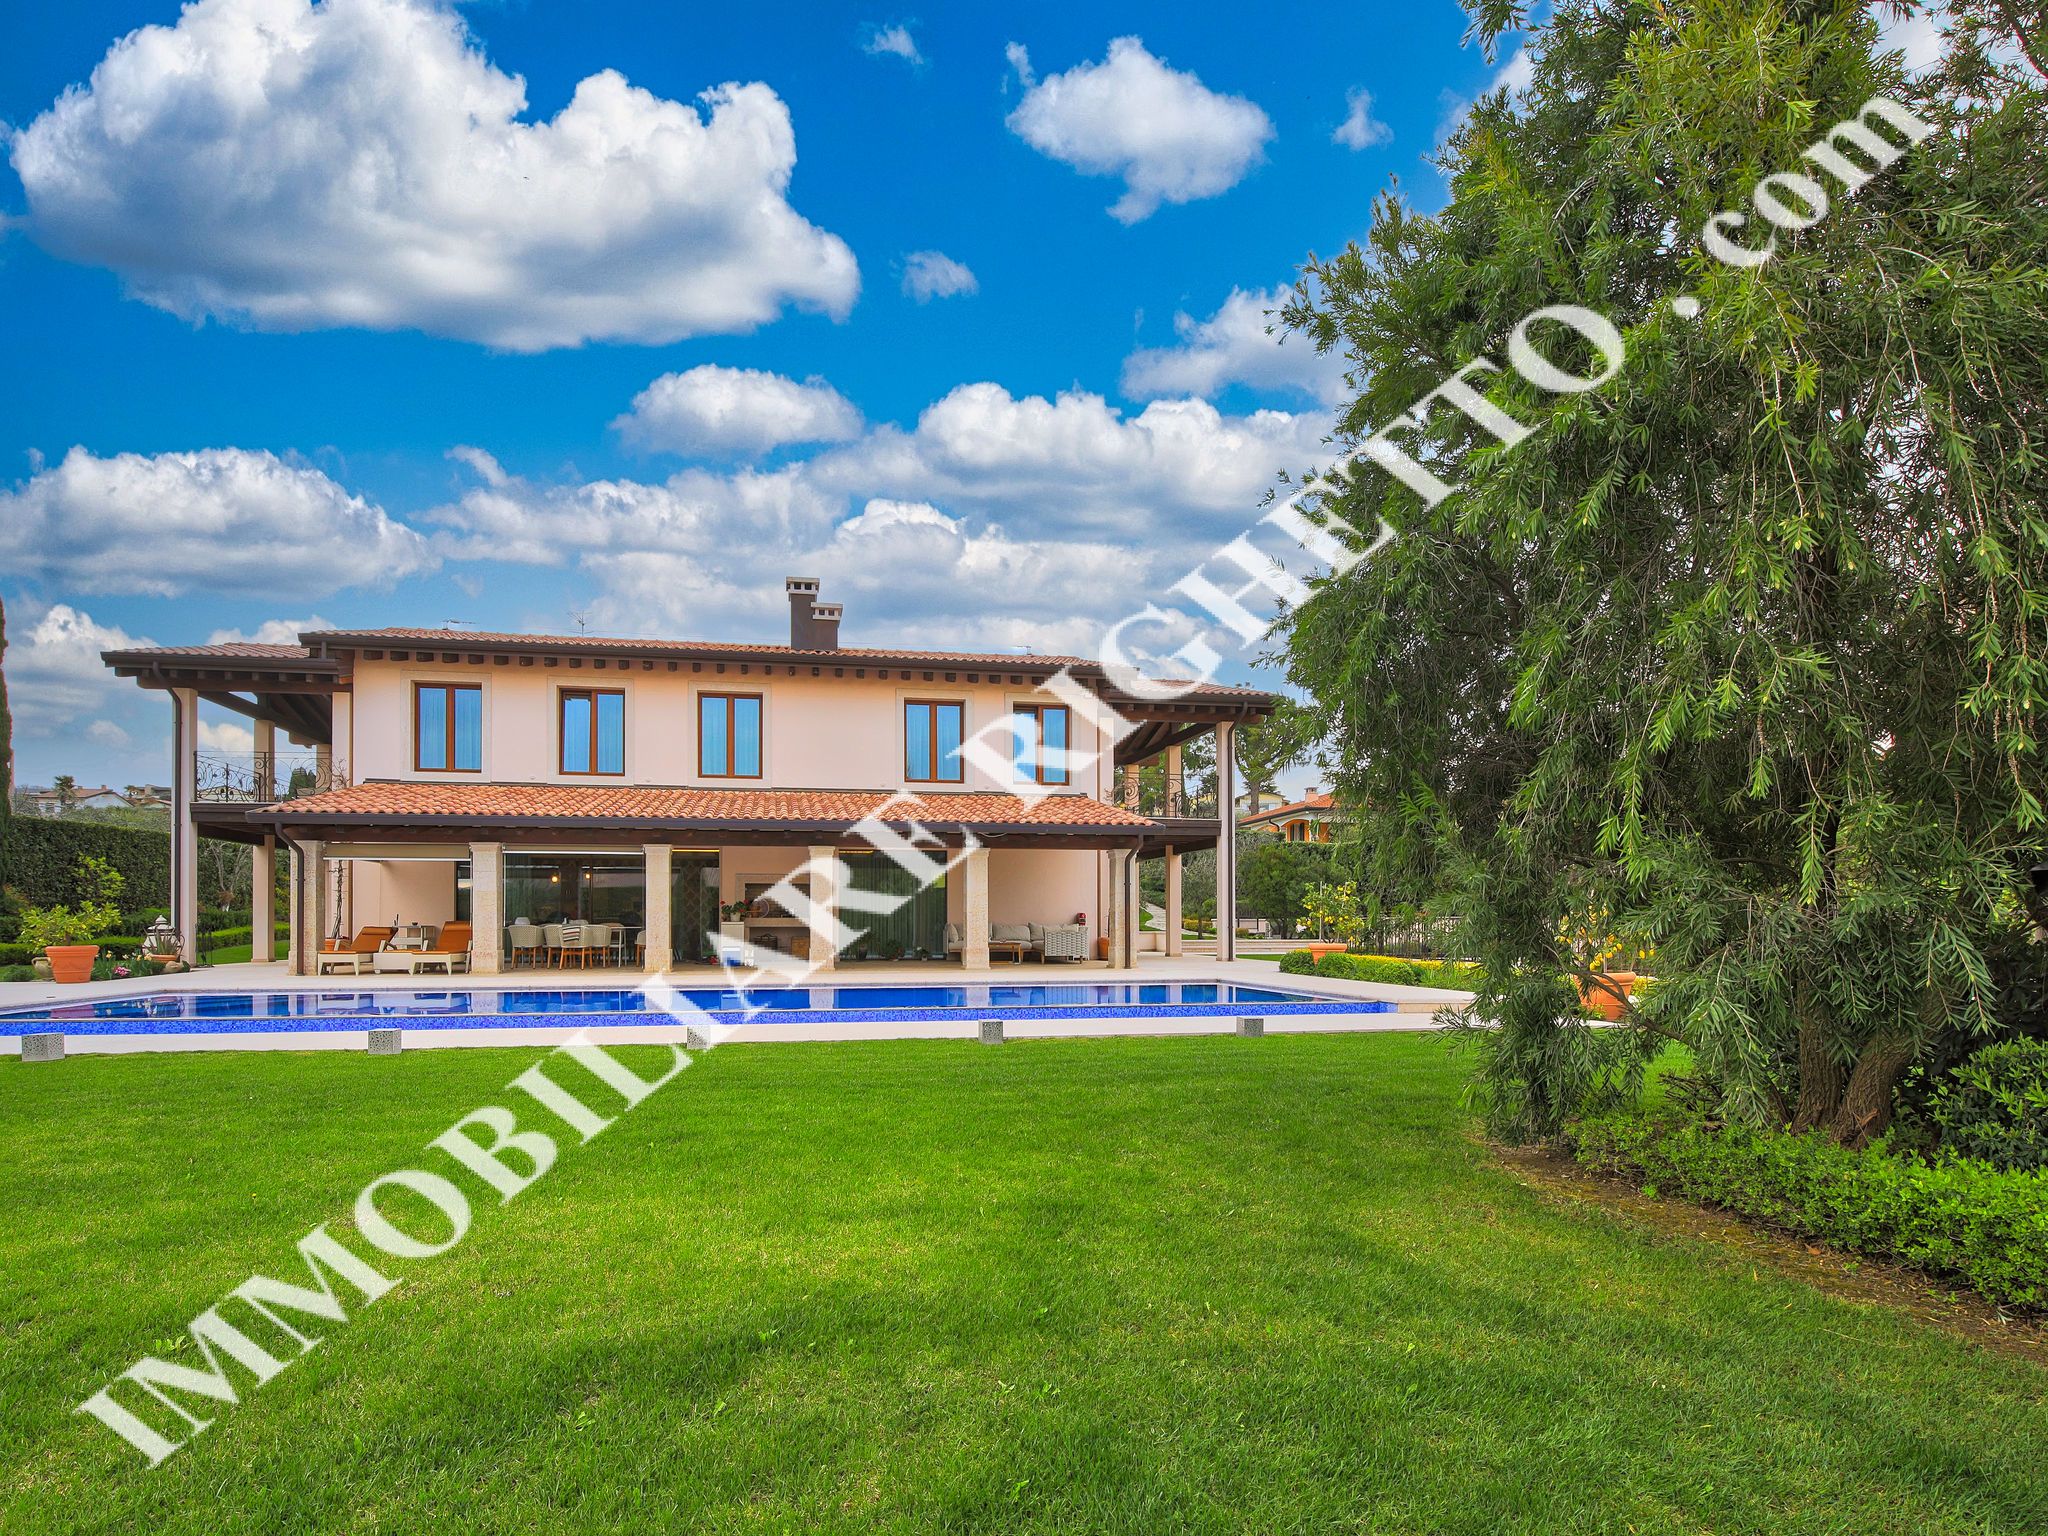 offer property for sale Luxury villa a stone's throw from the lake.